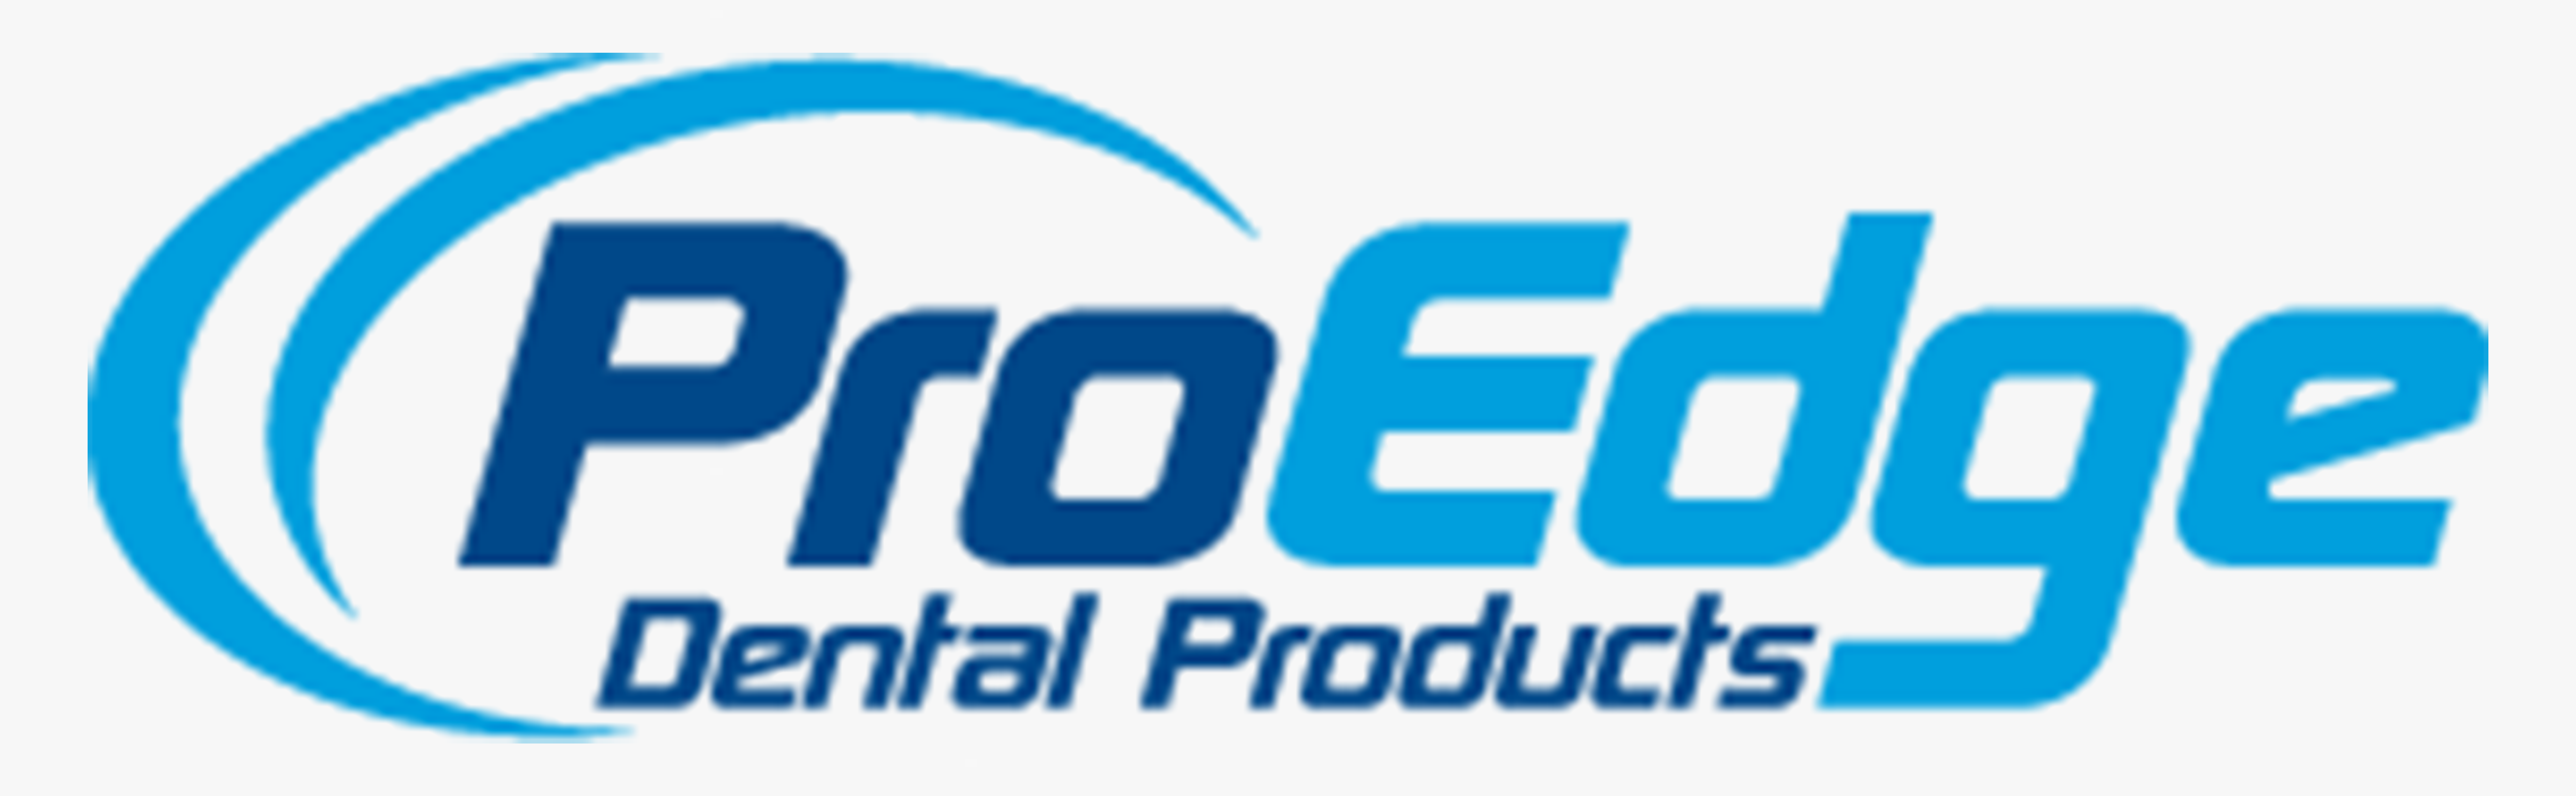 ProEdge Dental Products